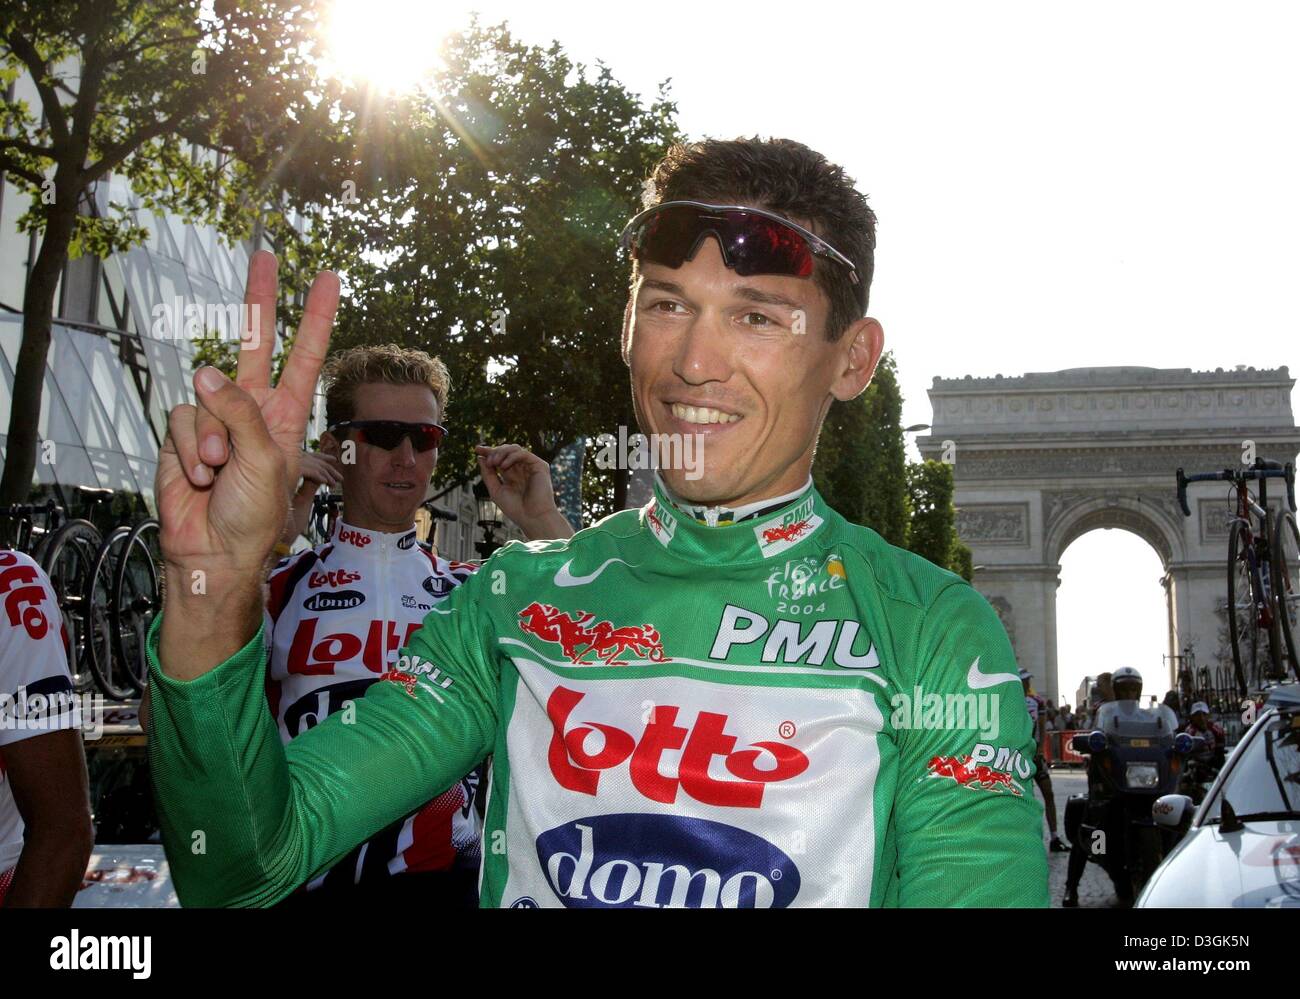 (dpa) - Australian cyclist Robbie McEwen of team Lotto-Domo celebrates winning the green jersey of the best sprinter by making the victory sign after the end of the last stage of the 2004 Tour de France cycling race in Paris, France, 25 July 2004. McEwen won the green jersey for the second time. The 163 km long final stage of the 91st Tour de France led from Montereau to the famous Stock Photo